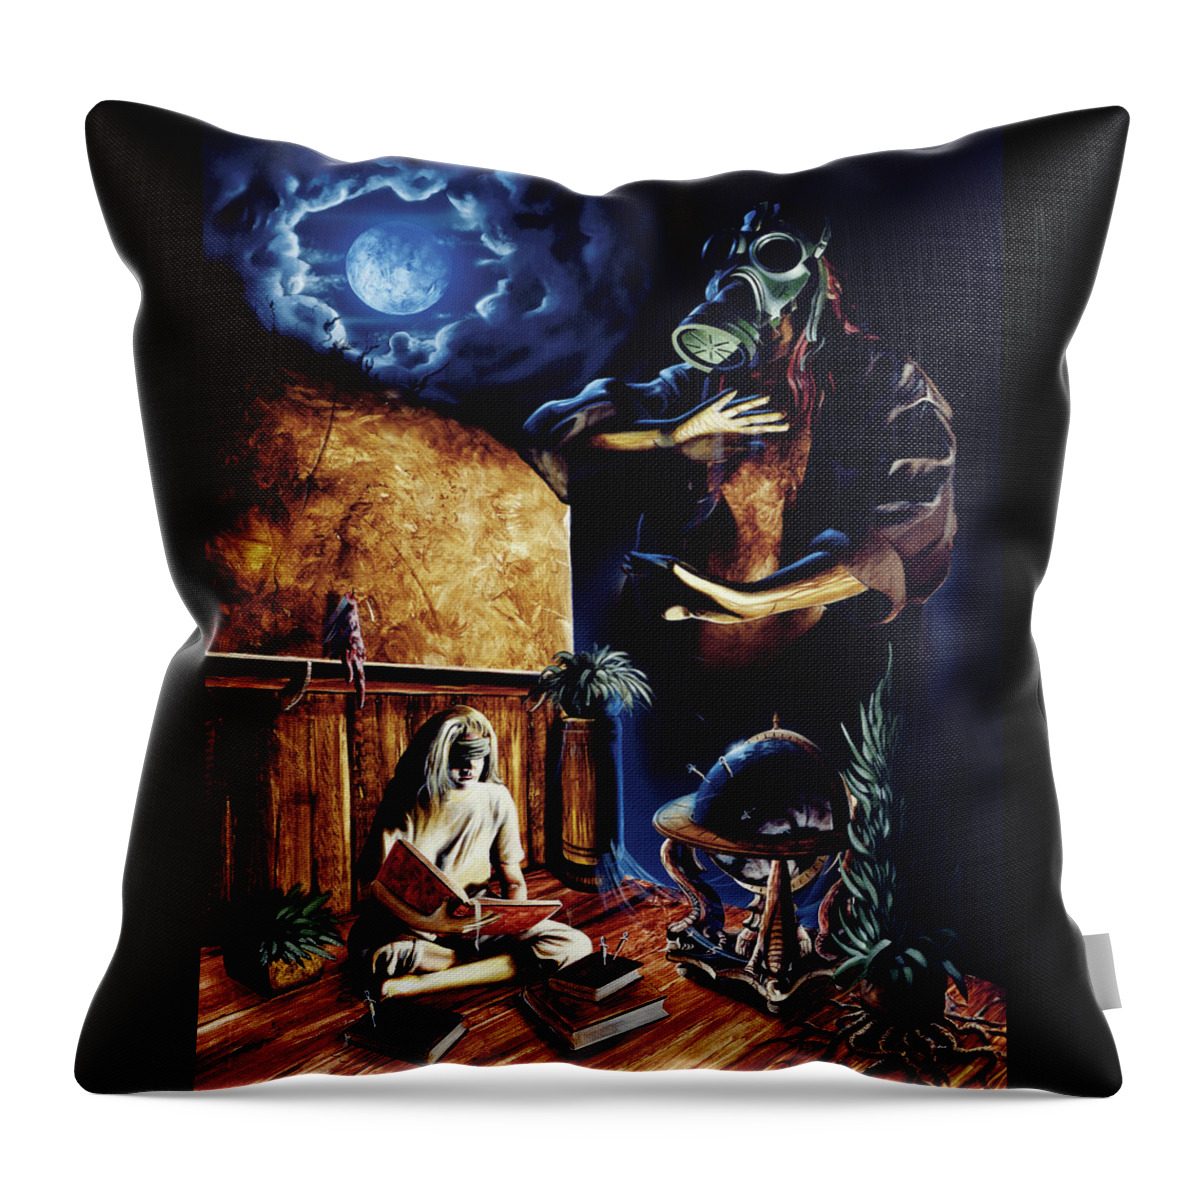 Nocturnal Throw Pillow featuring the painting For All Eternity by Sv Bell